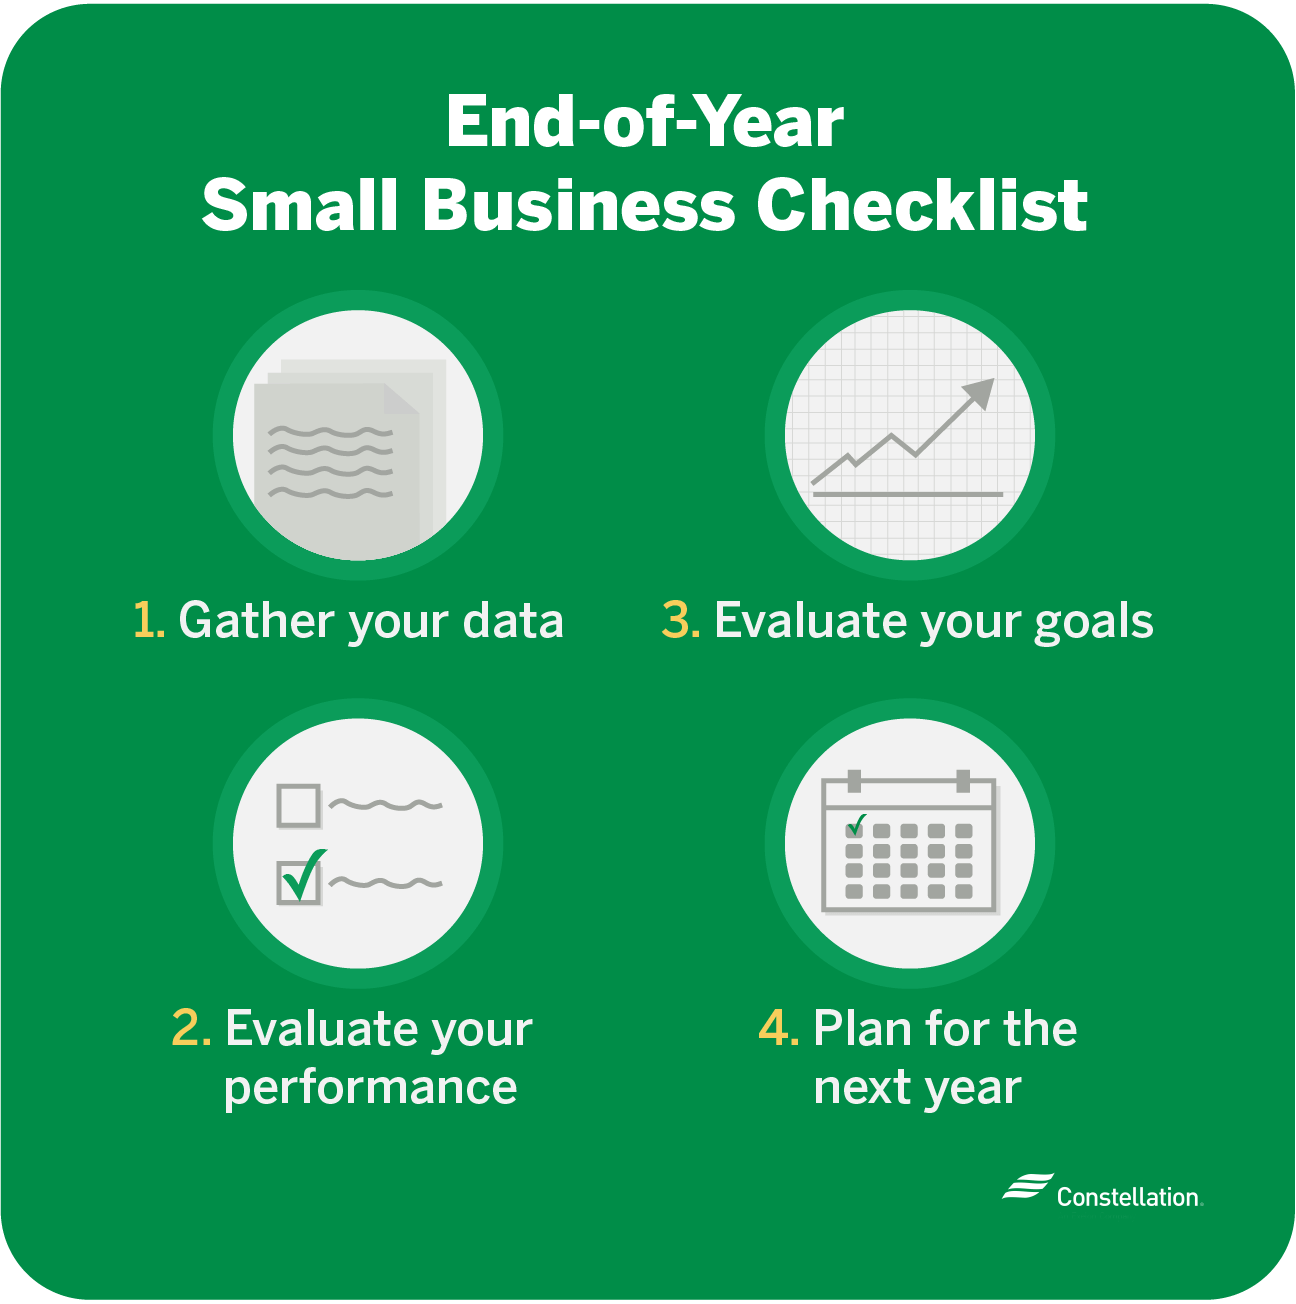 end-of-year small business planning